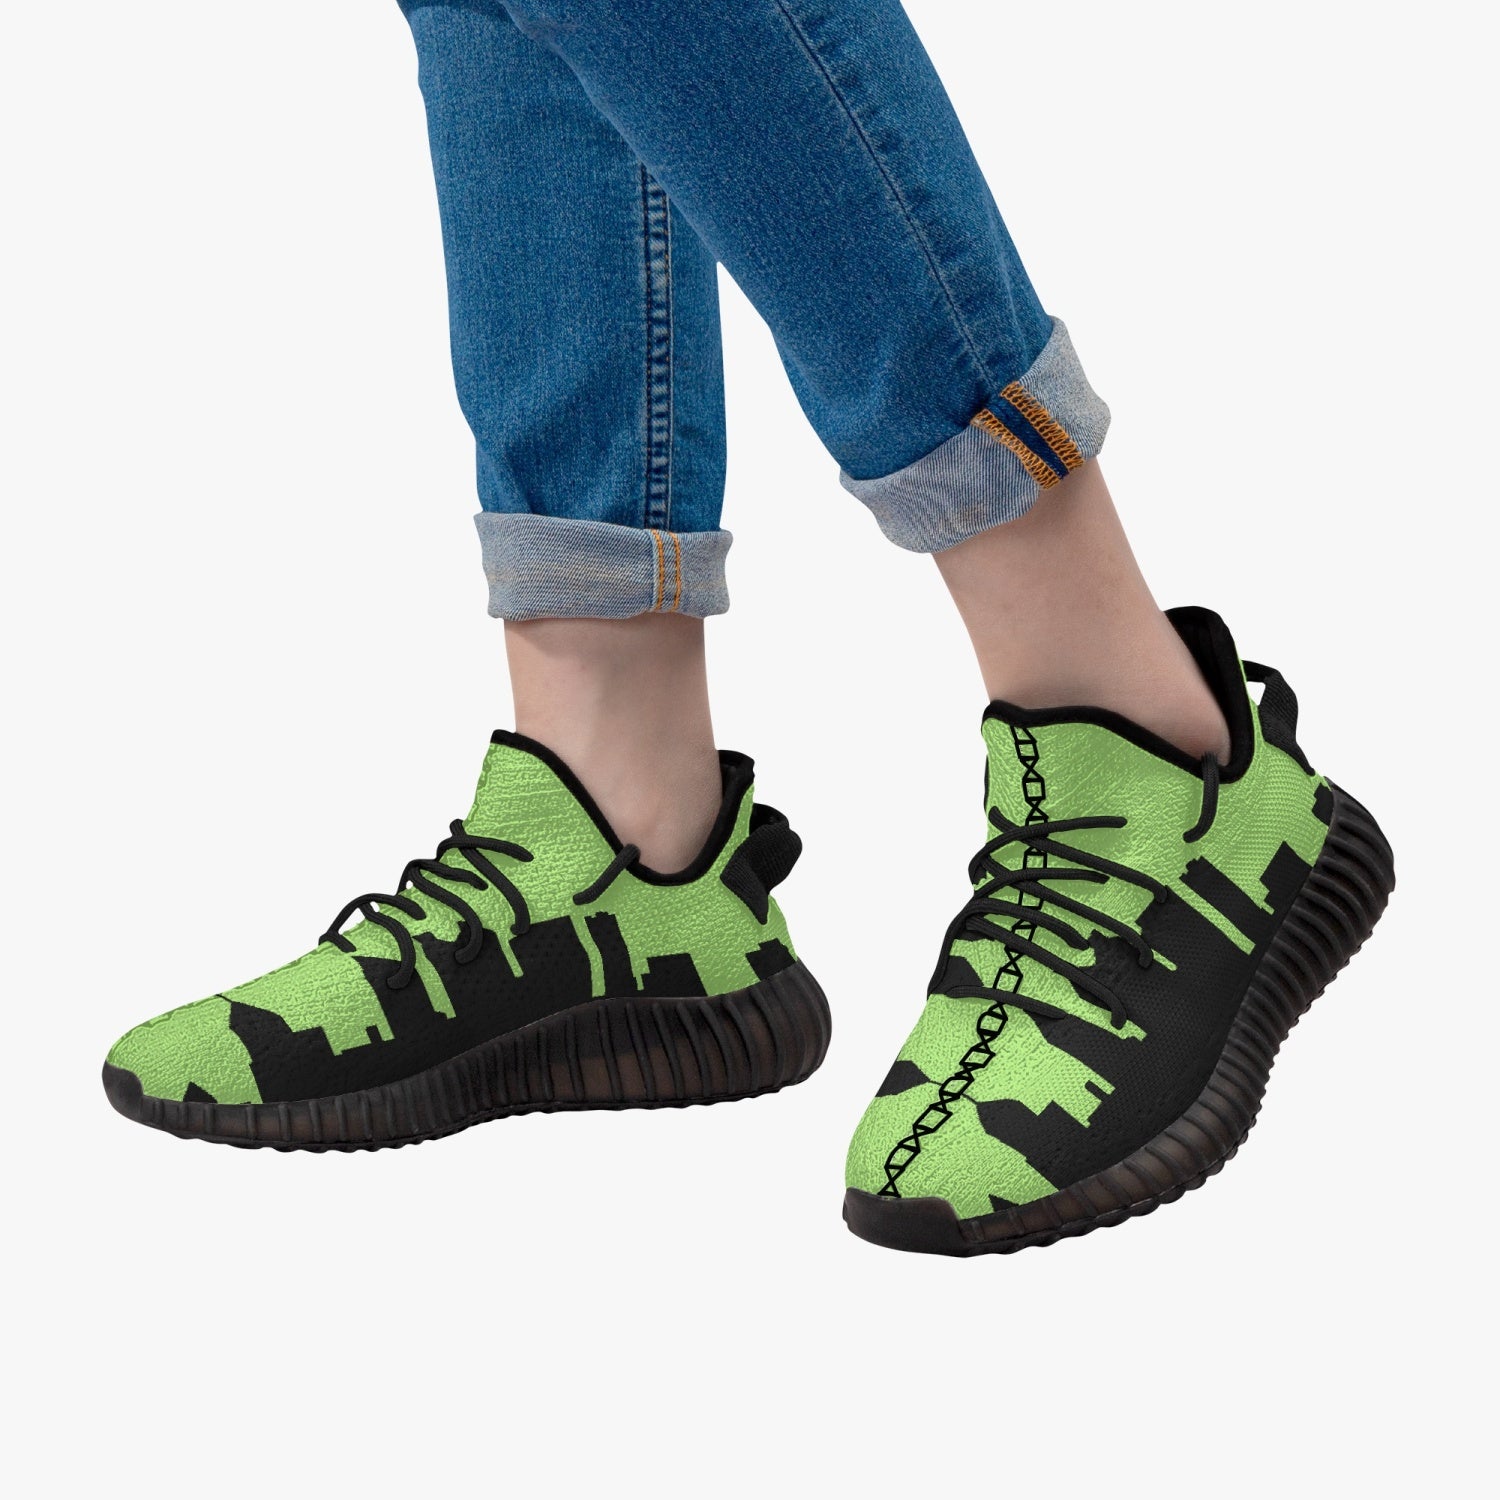 Officially Sexy Neon Green & Black Skyline Adult Unisex Mesh Knit Sneakers